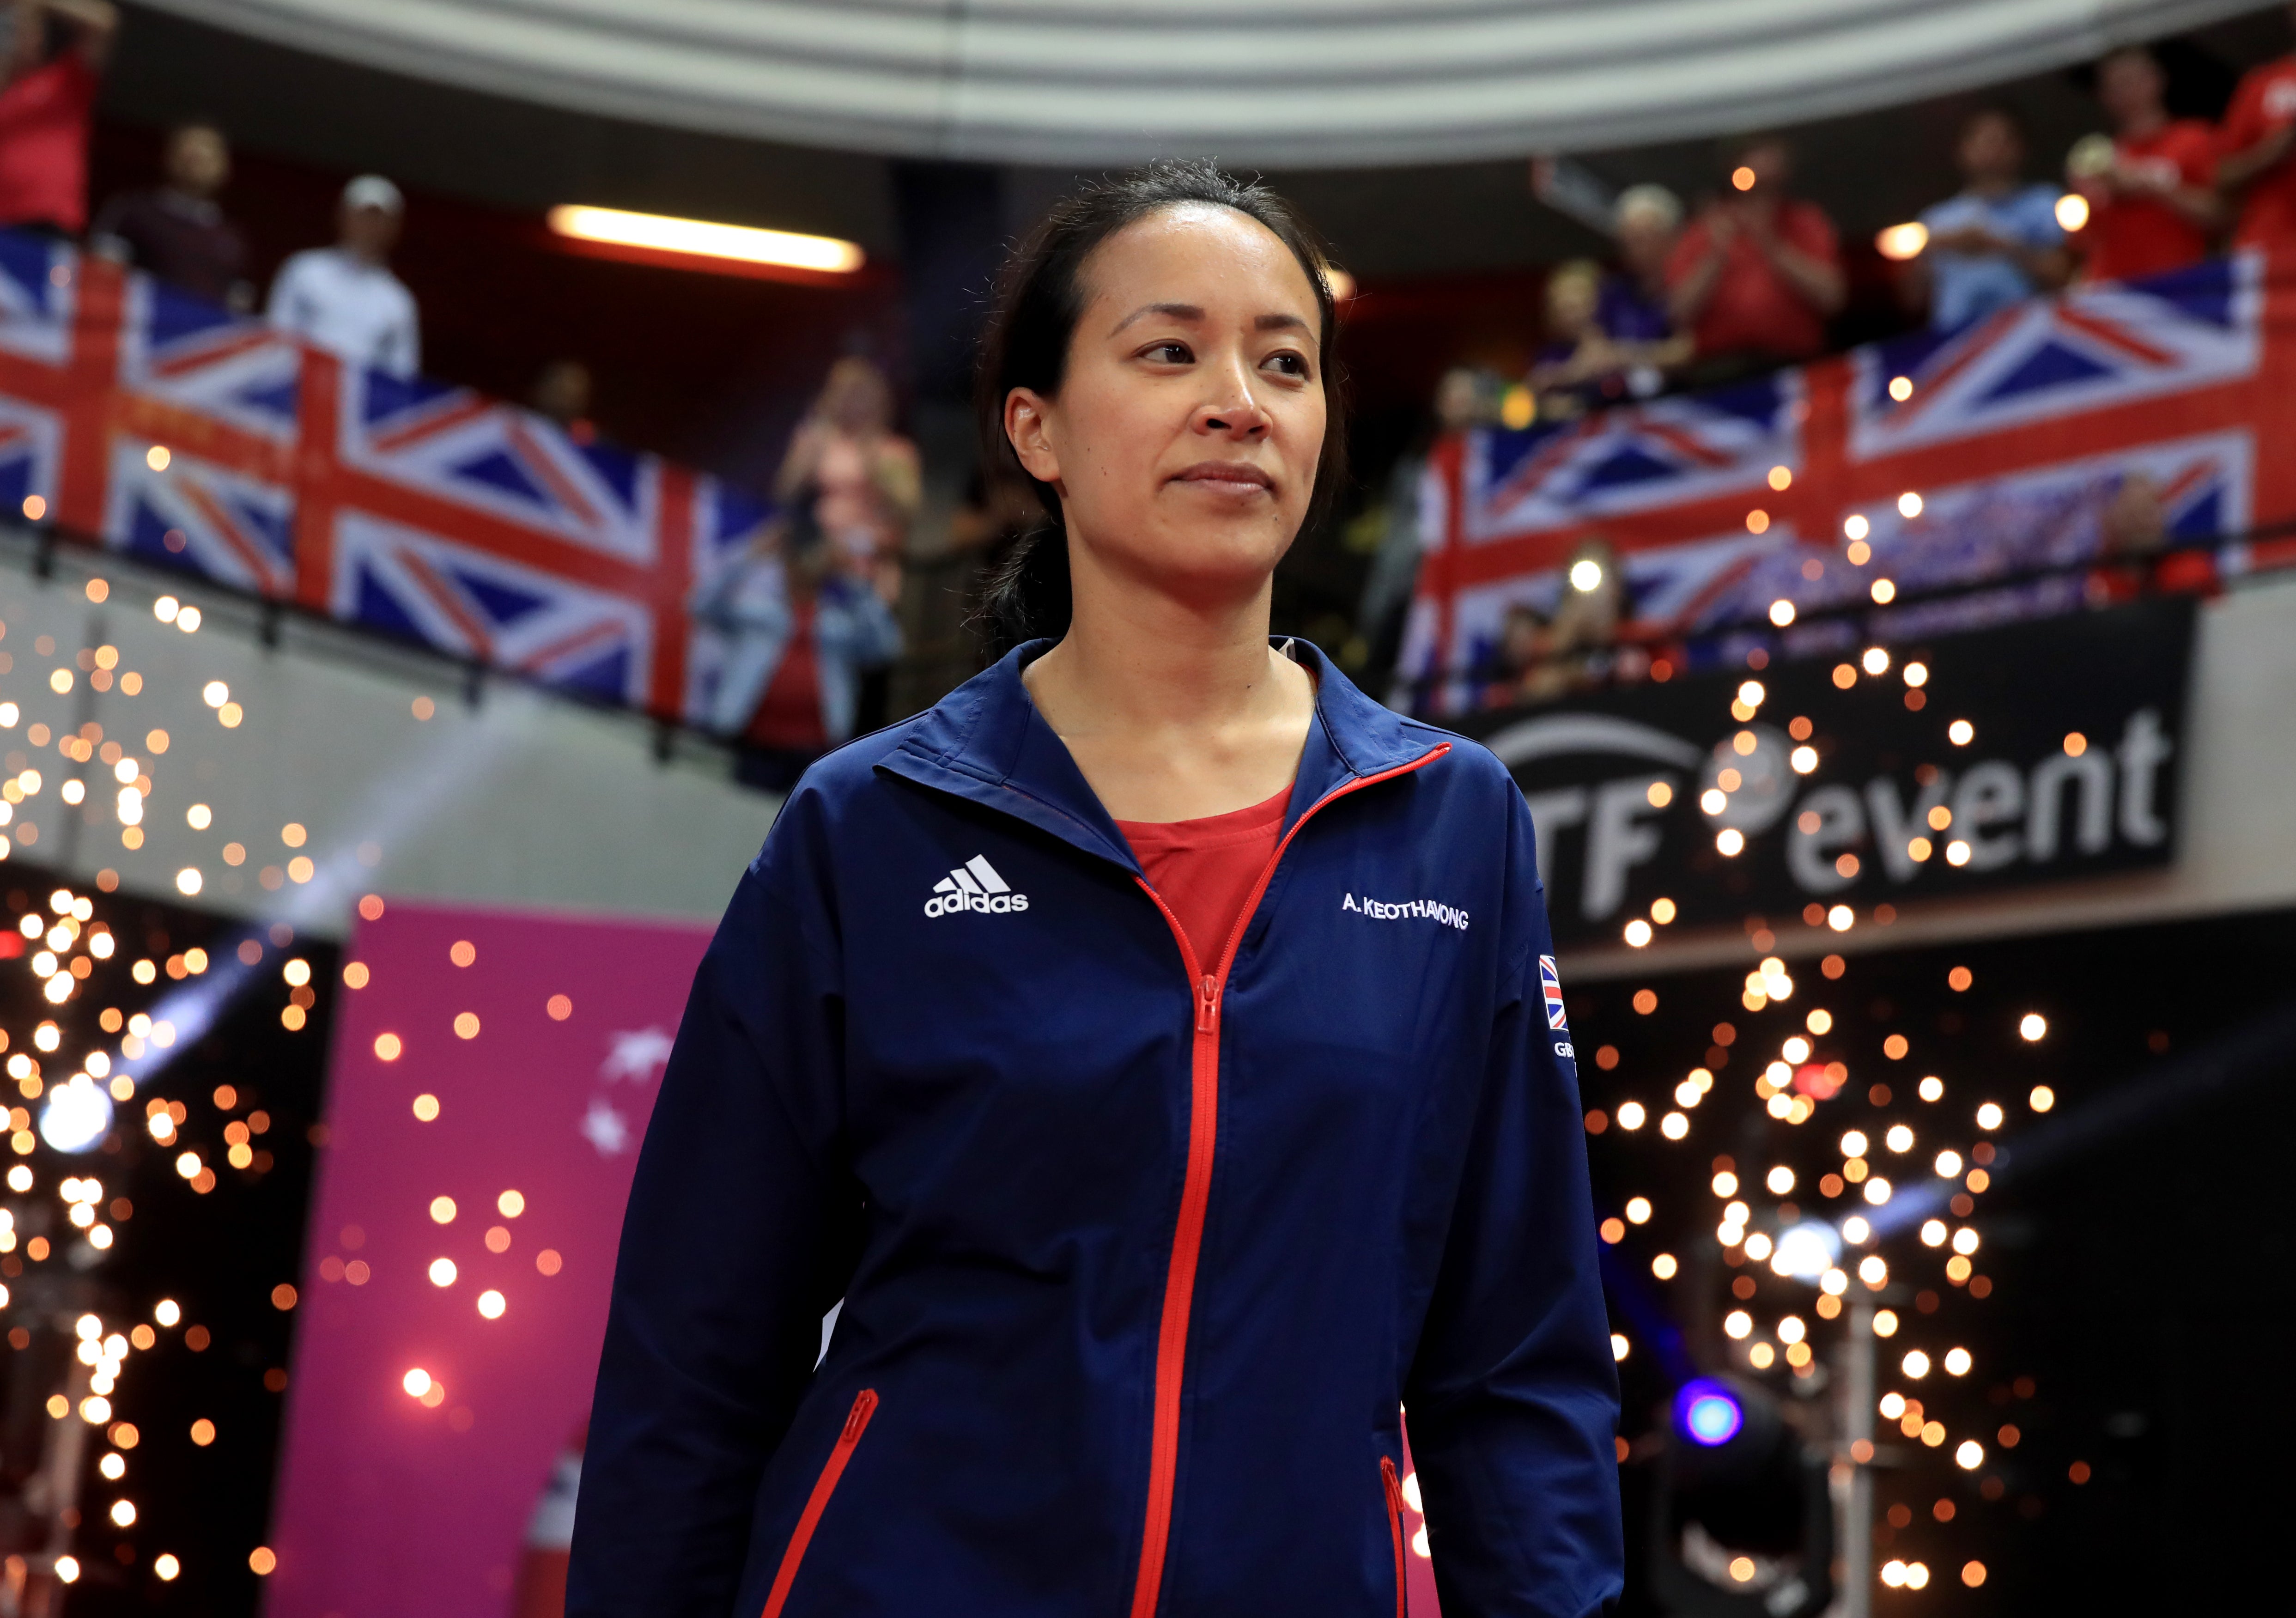 Anne Keothavong’s side will join the Billie Jean King Cup finals field as hosts (Adam Davy/PA)